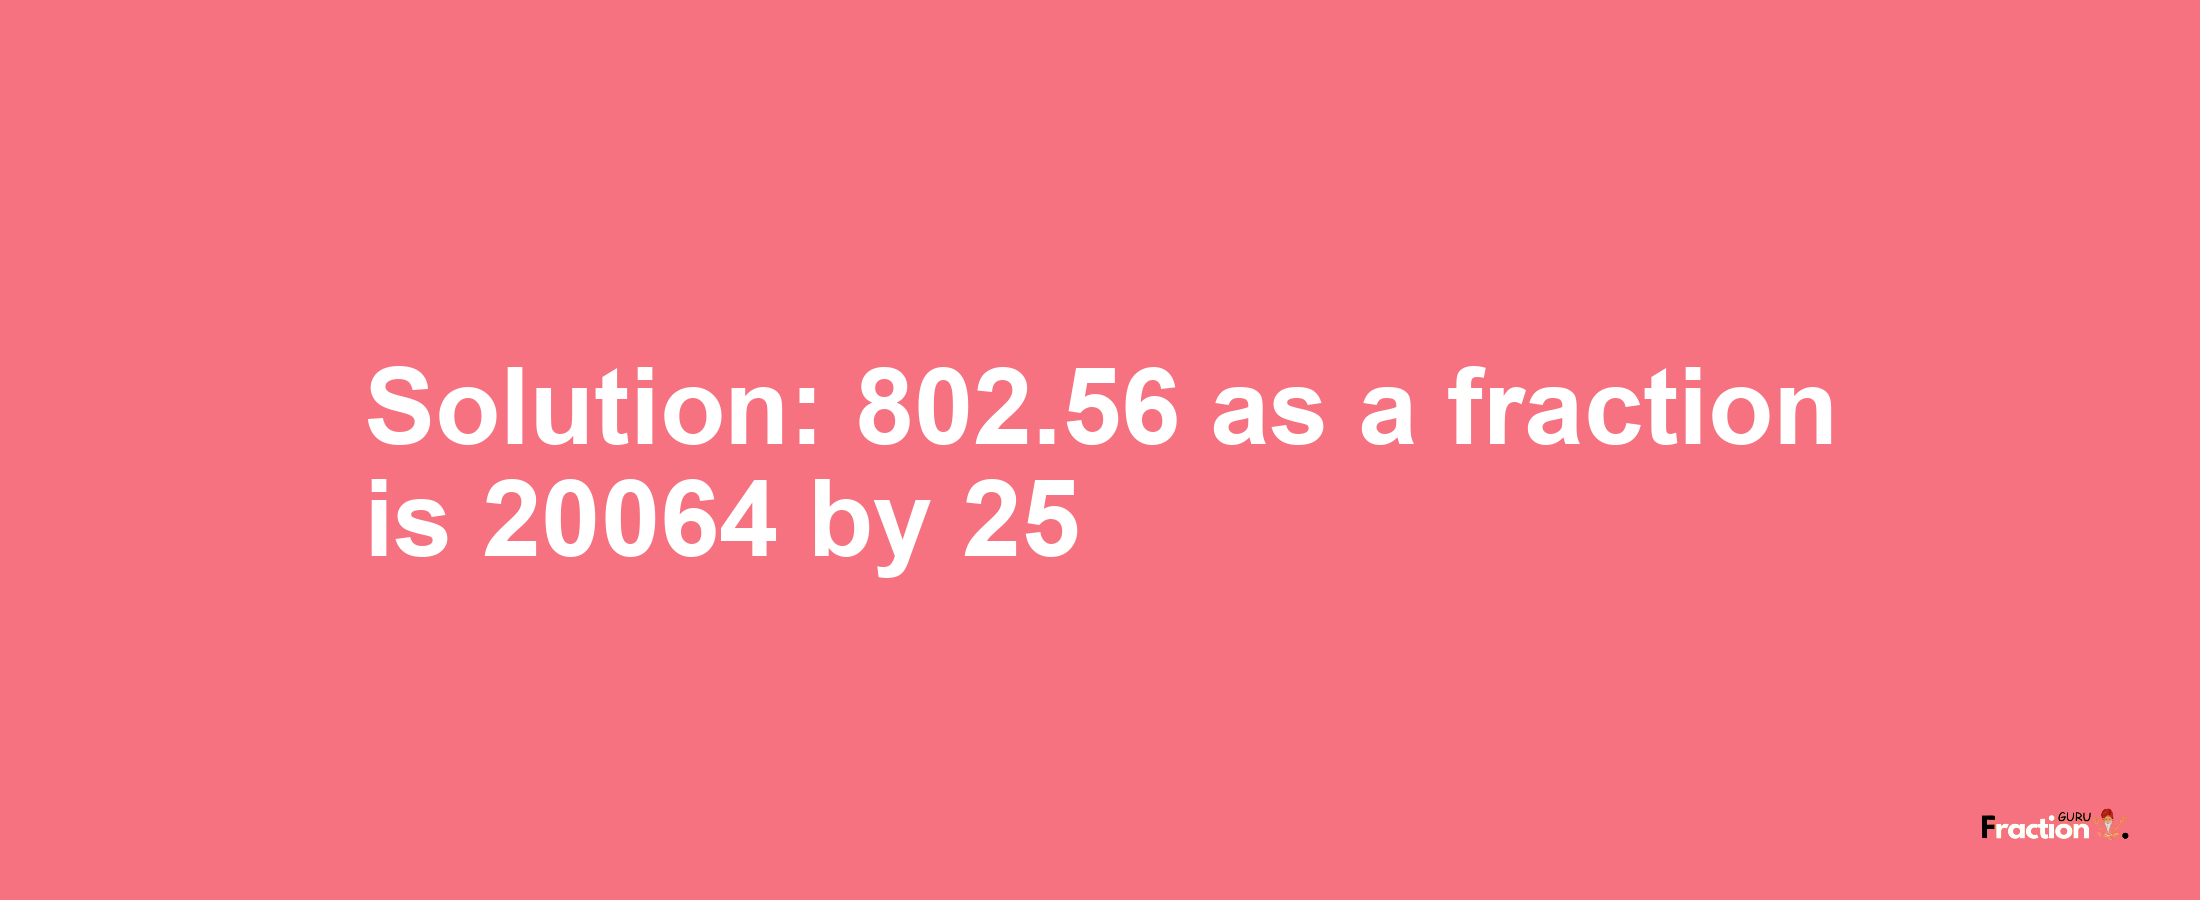 Solution:802.56 as a fraction is 20064/25